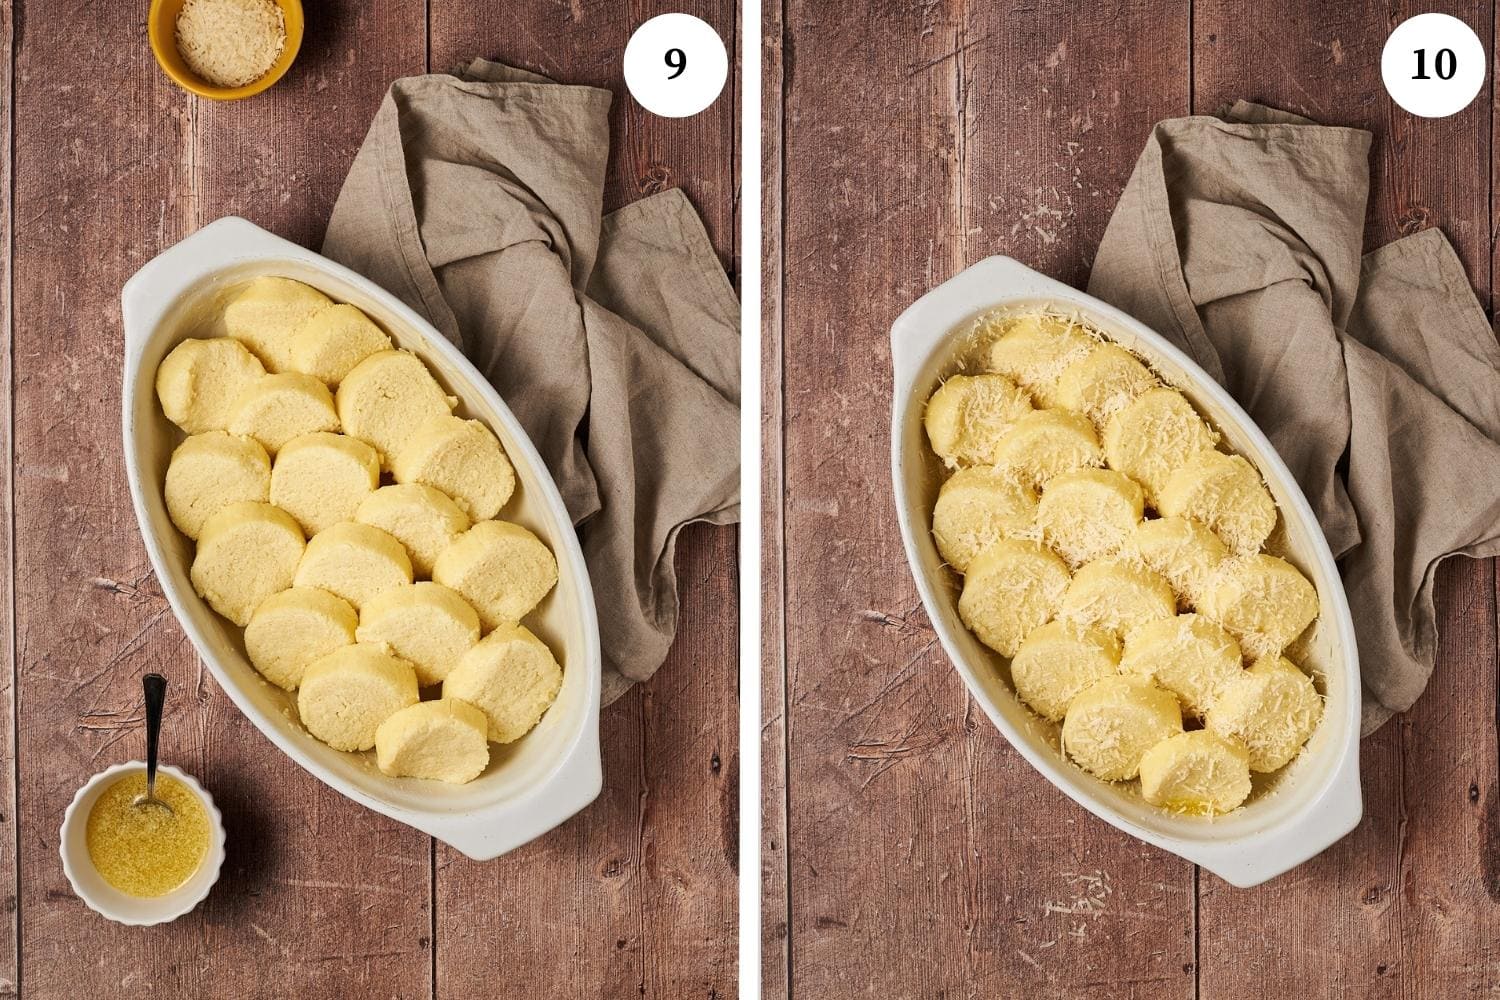 place the semolina gnocchi alla romana discs in a buttered dish and sprinkle pecorino cheese on top